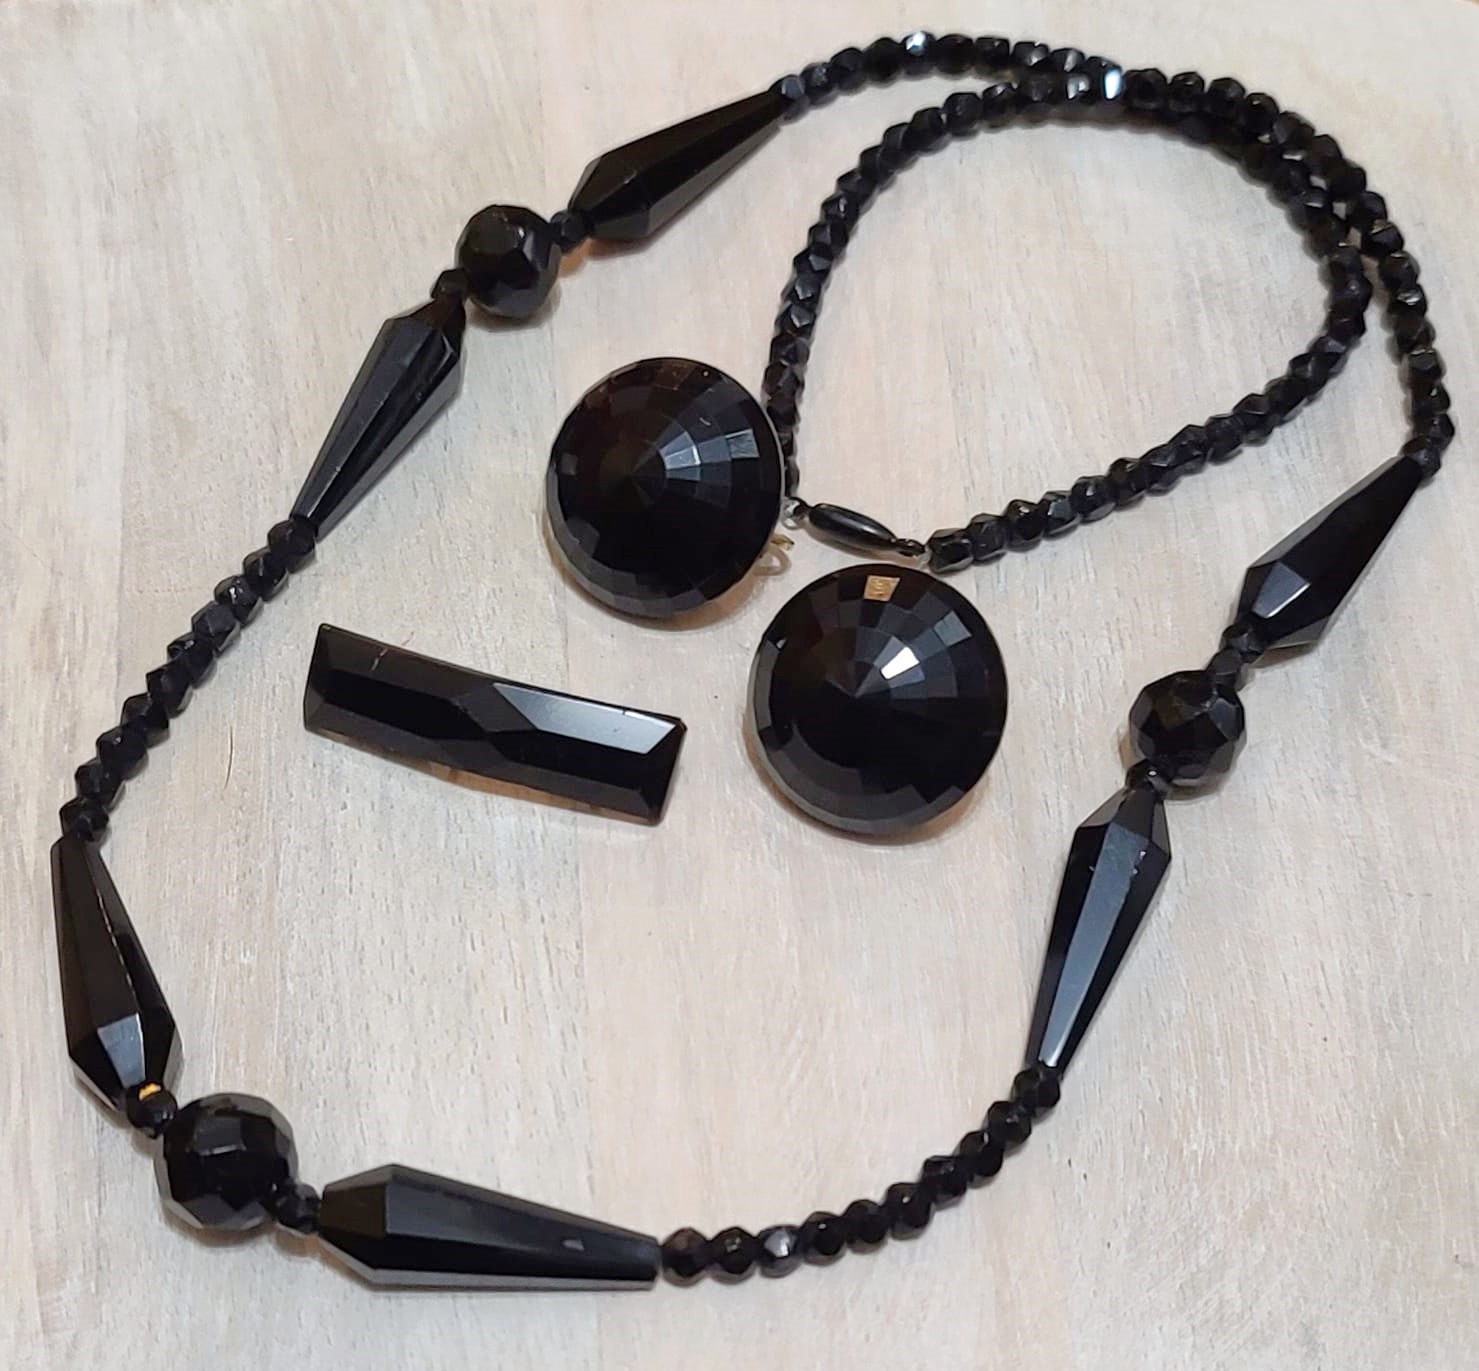 Faceted black glass necklace, earrings & pinand clipon earrings